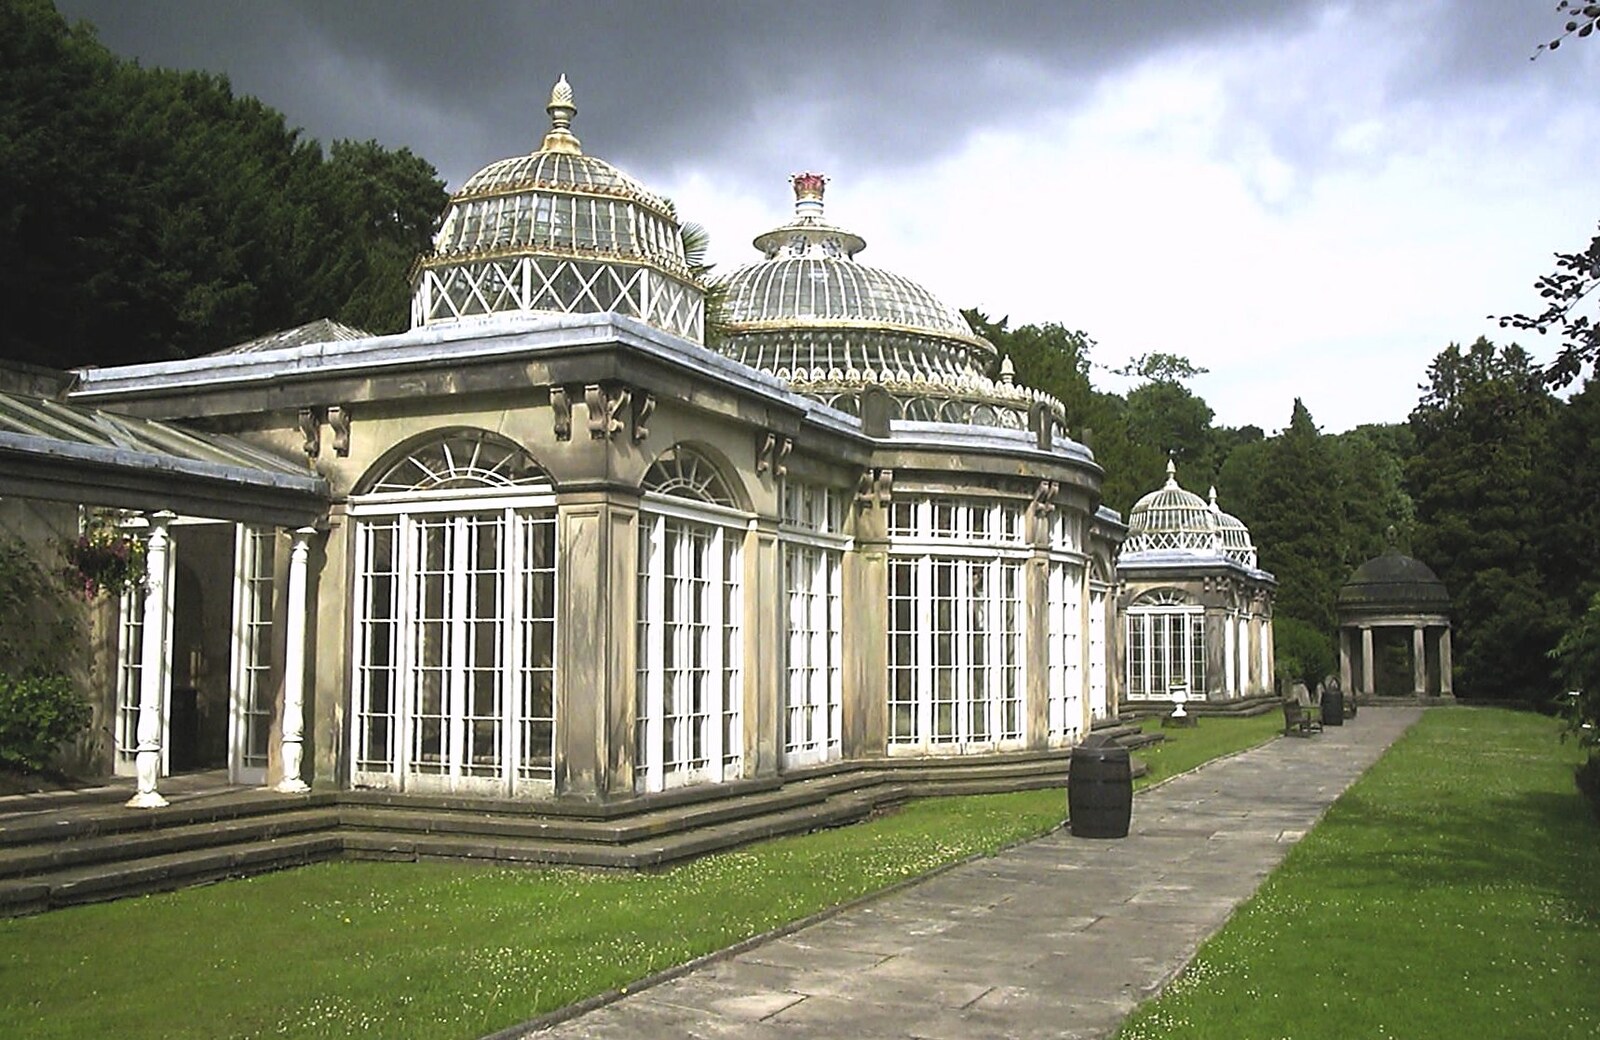 The orangery; a bit more derelict these days from A Trip to Alton Towers, Staffordshire - 19th June 2004